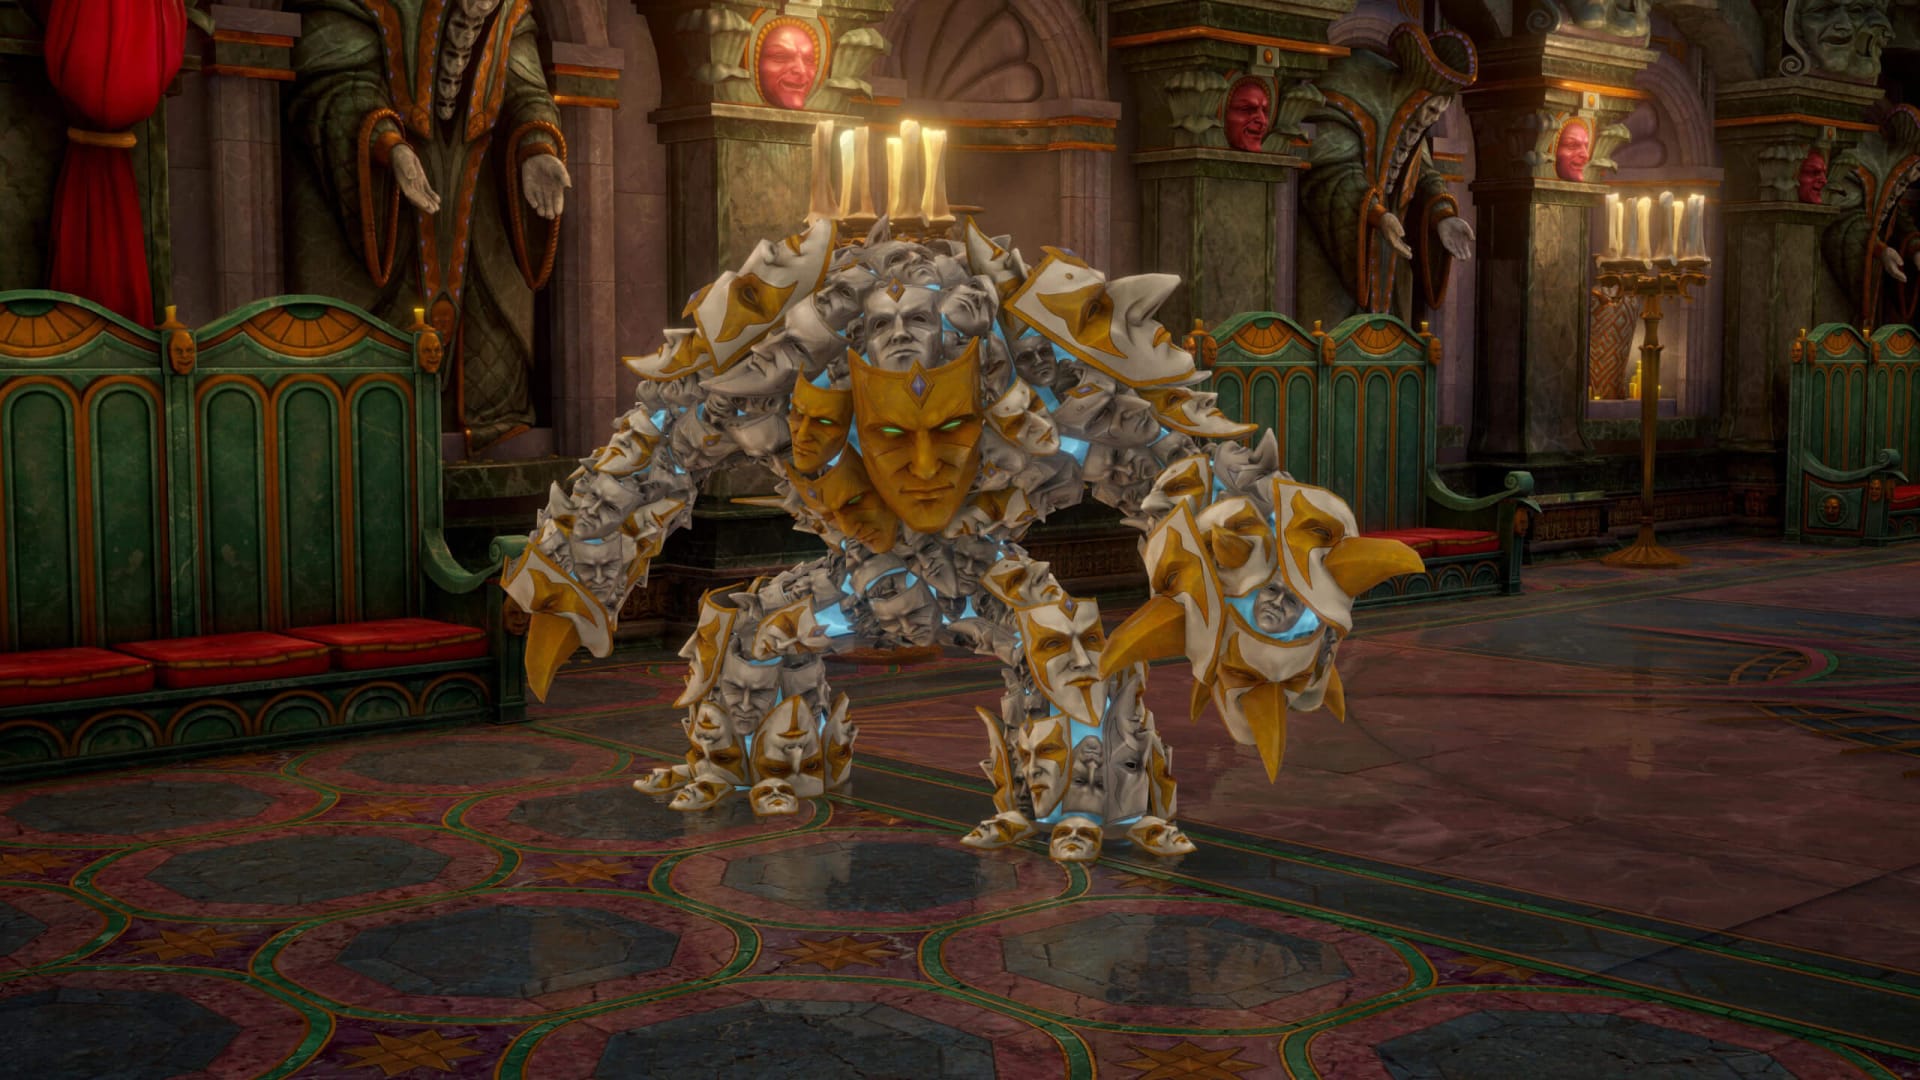 A golem-like creature covered in masks in the Pathfinder: Wrath of the Righteous DLC A Dance of Masks